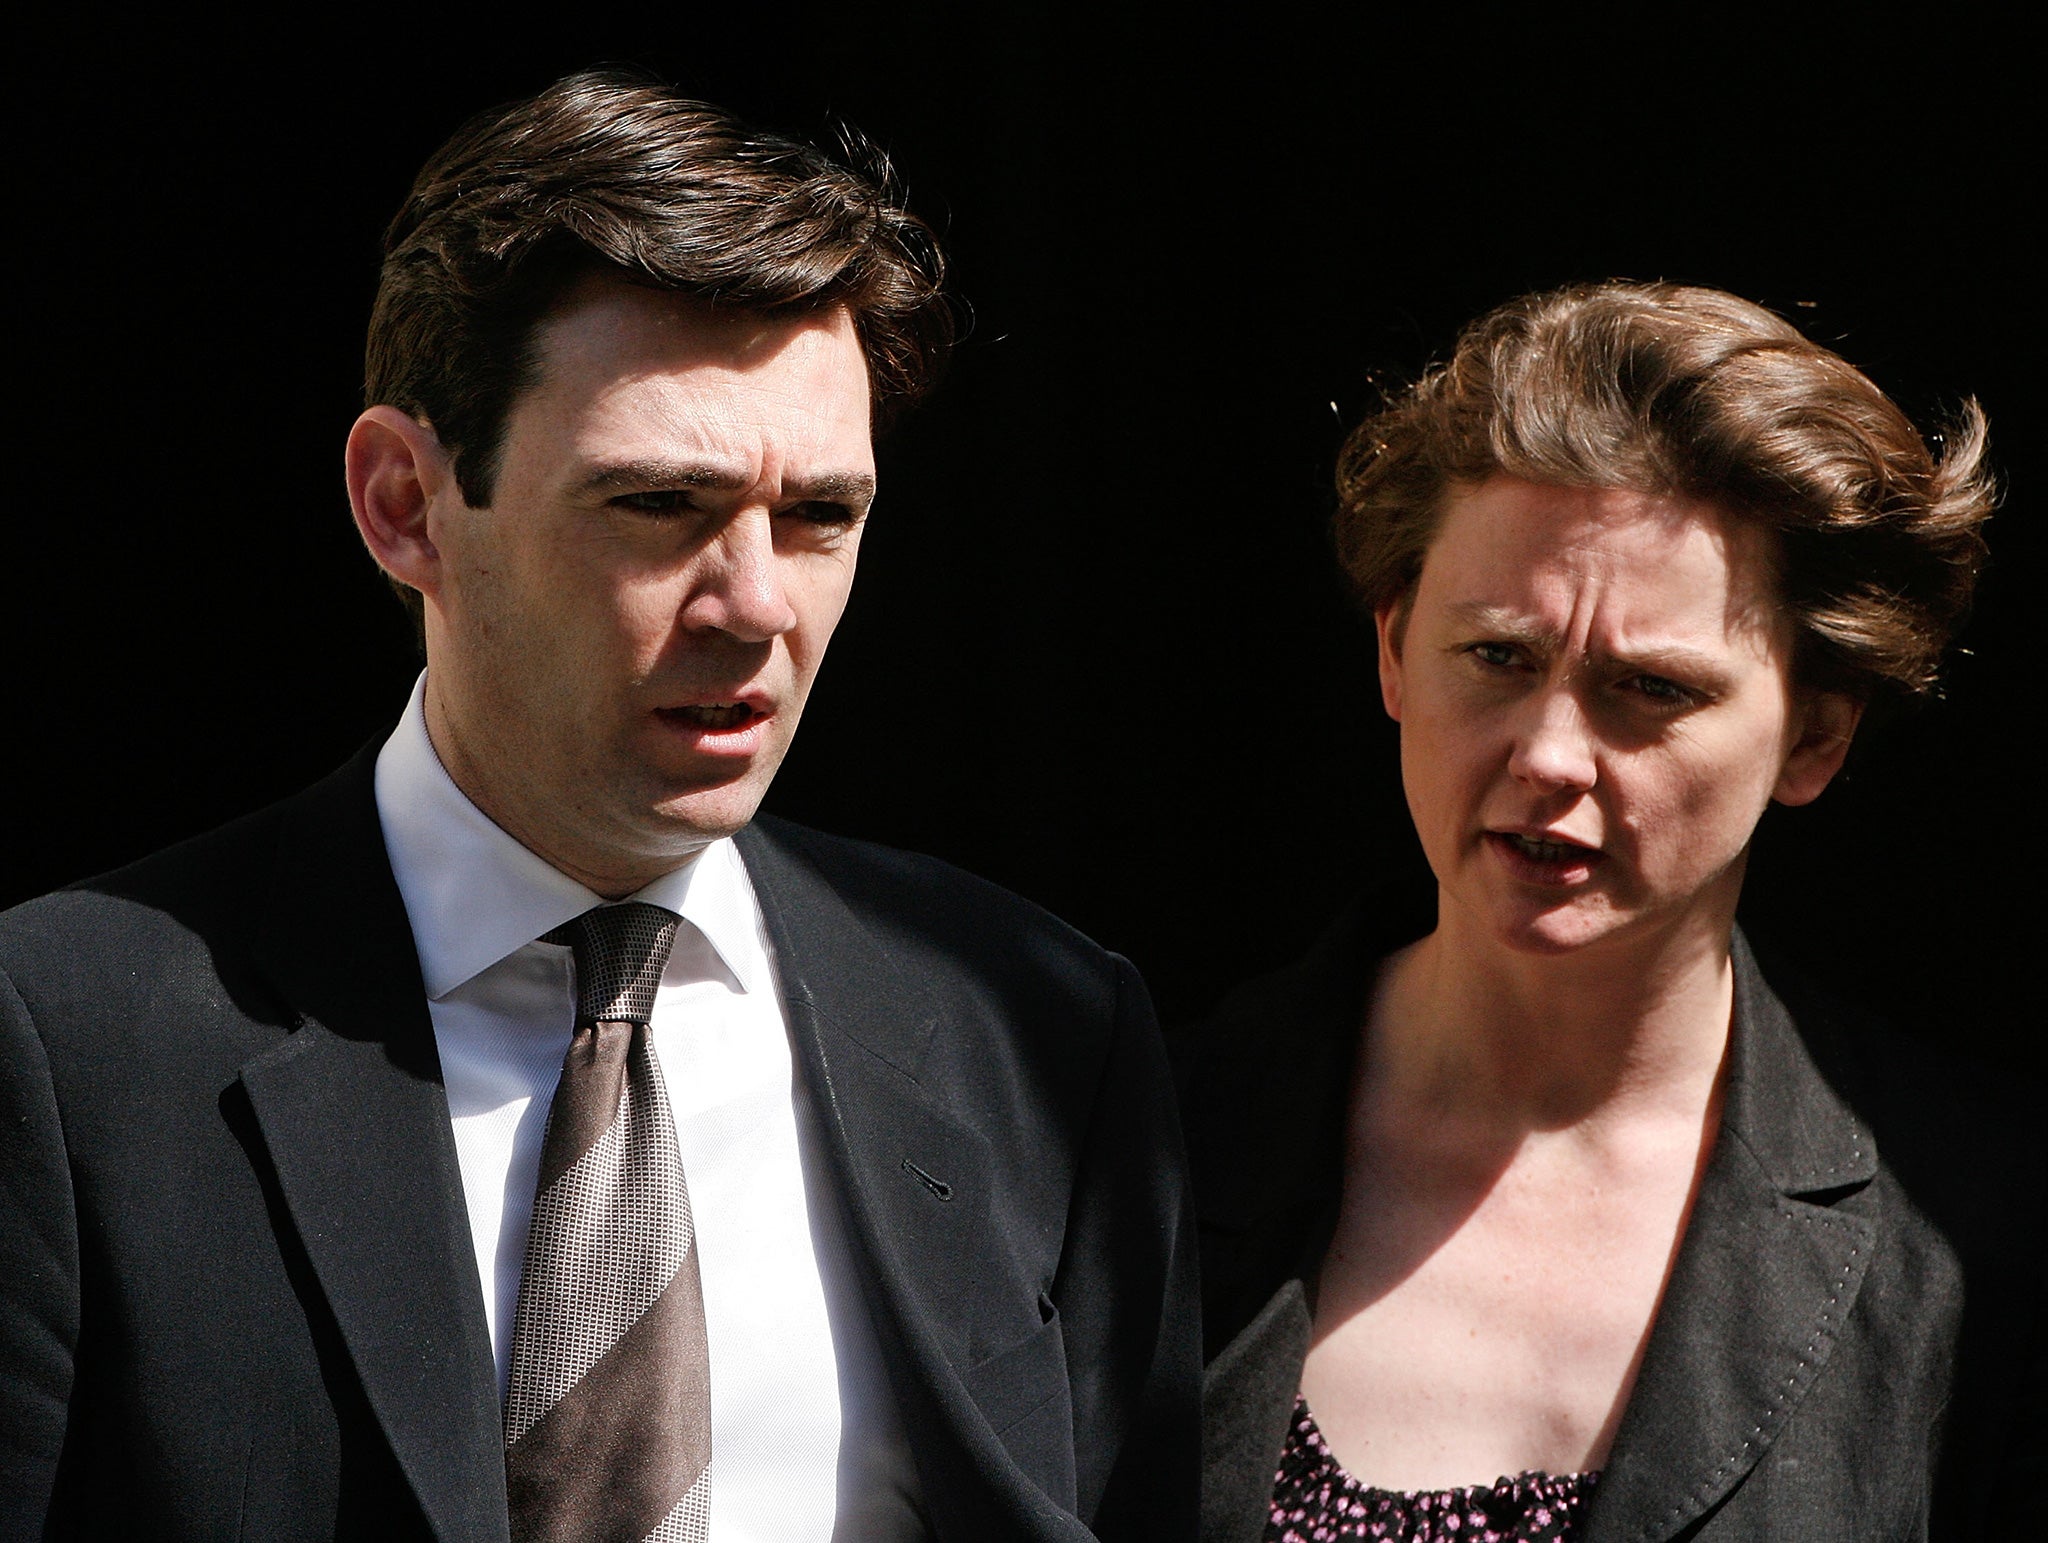 Andy Burnham and Yvette Cooper have both received significant donations as part of their leadership campaigns